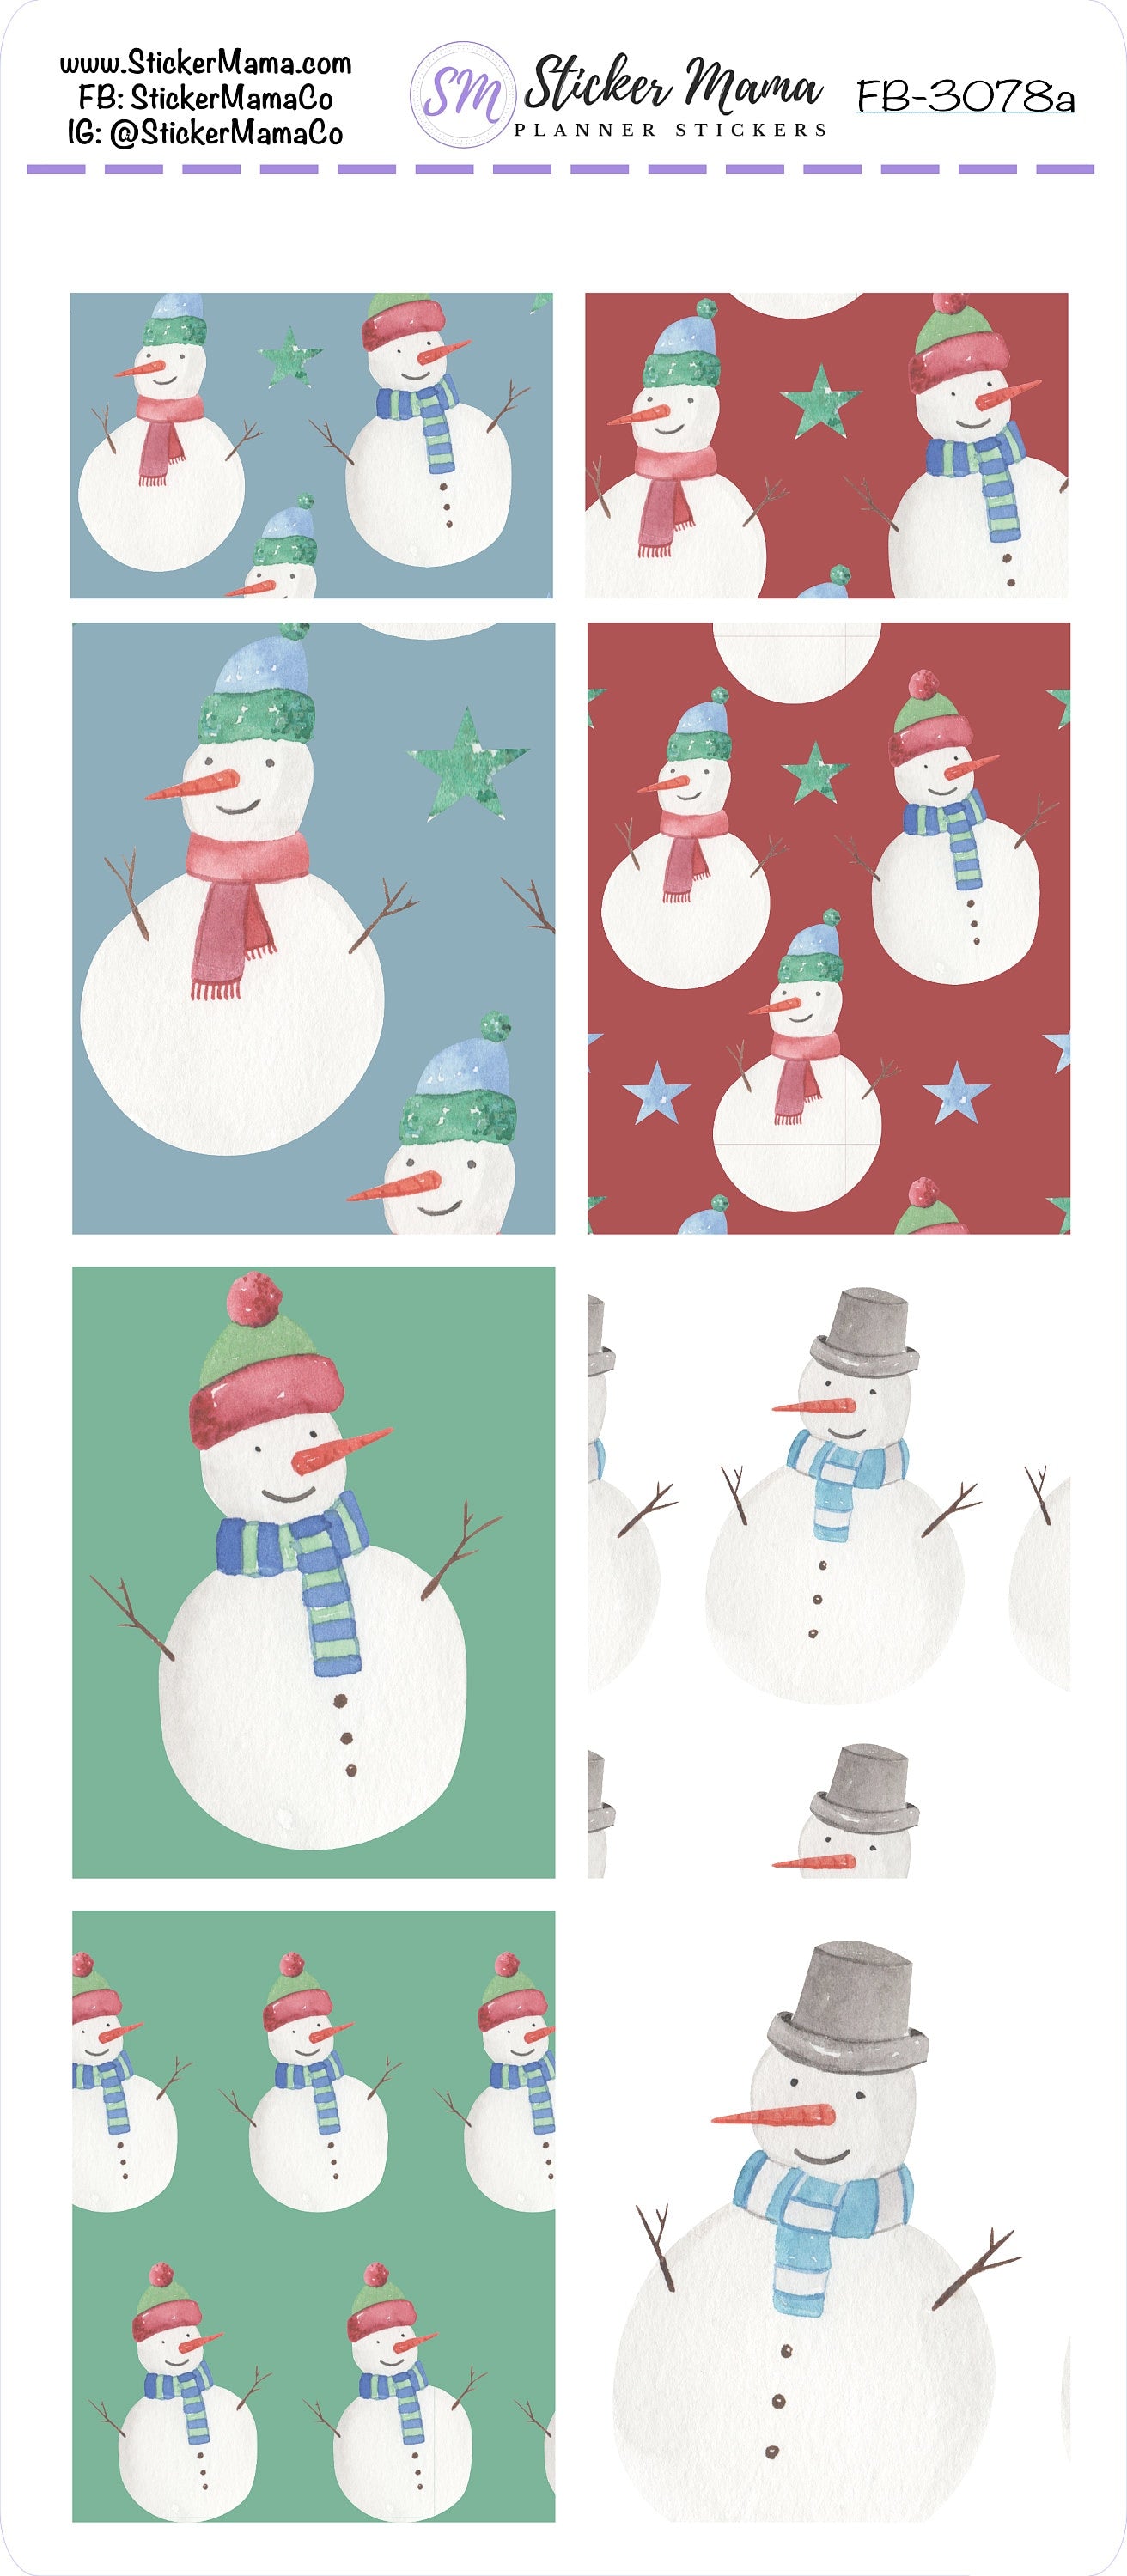 FB-3078 - FULL BOX Stickers - Snowmen - Planner Stickers - Full Box for Planners